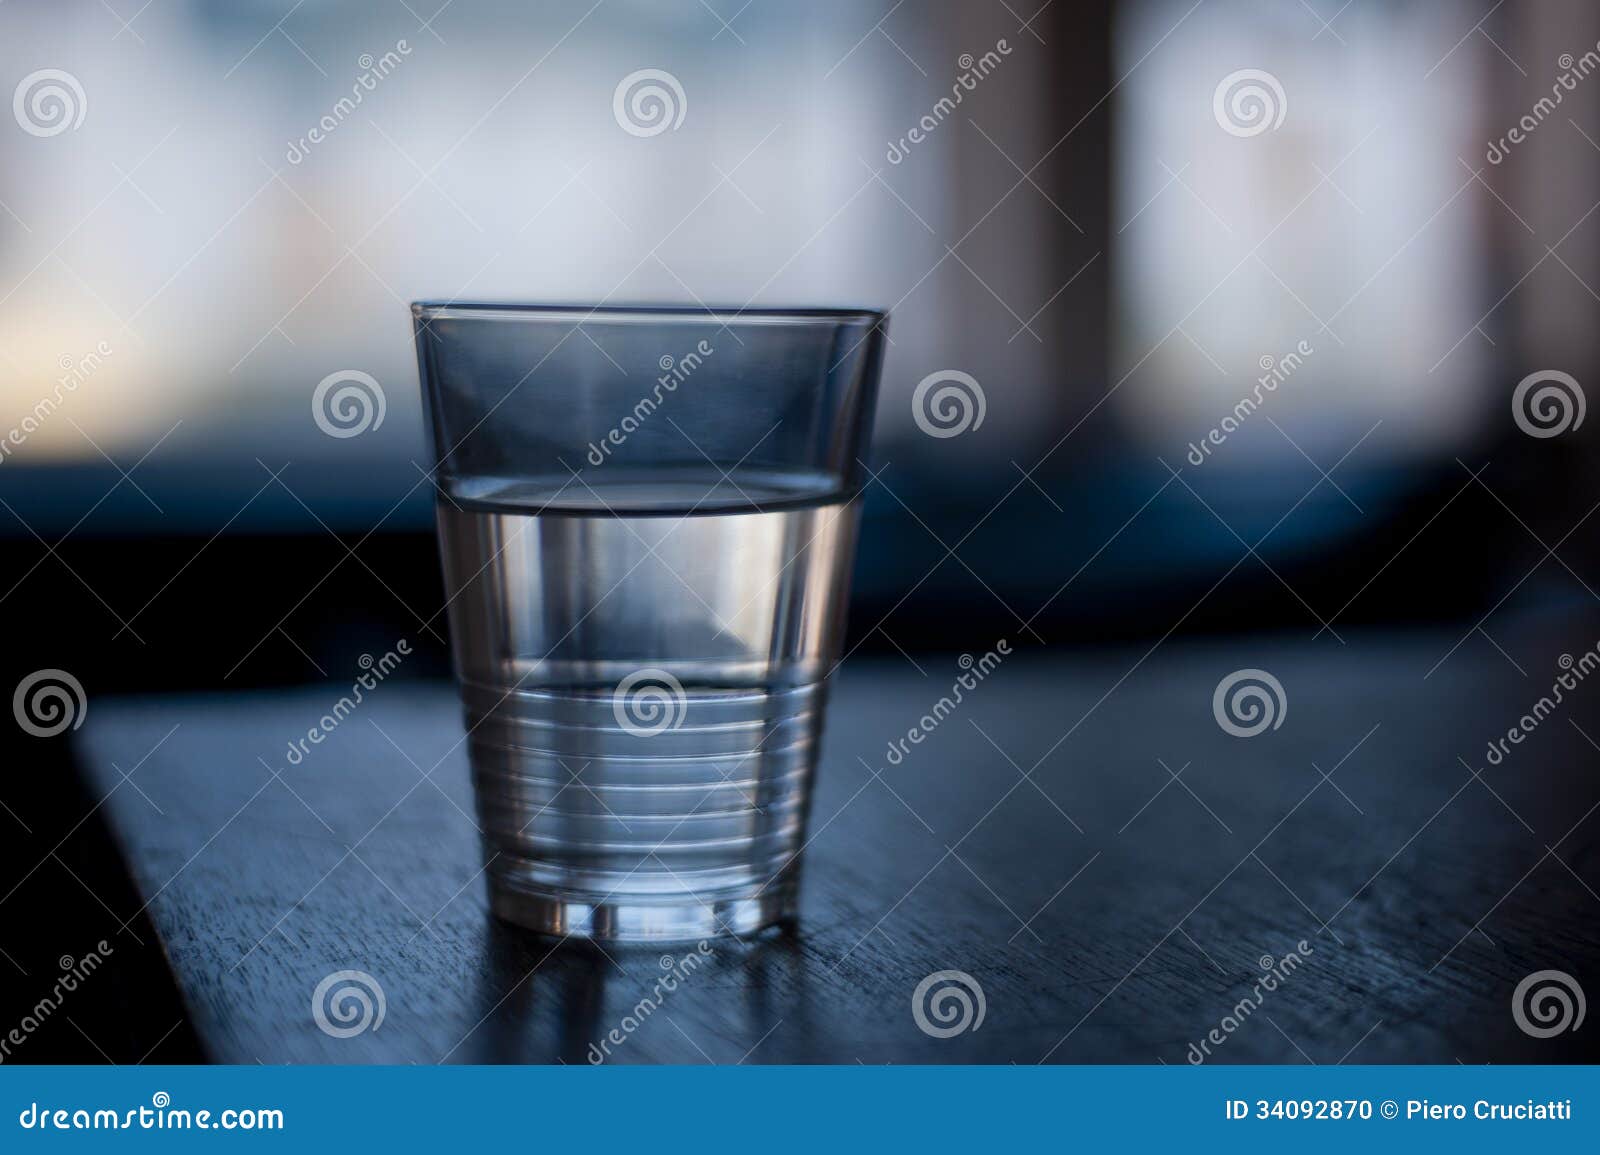 Glass Of Water Photos, Download The BEST Free Glass Of Water Stock